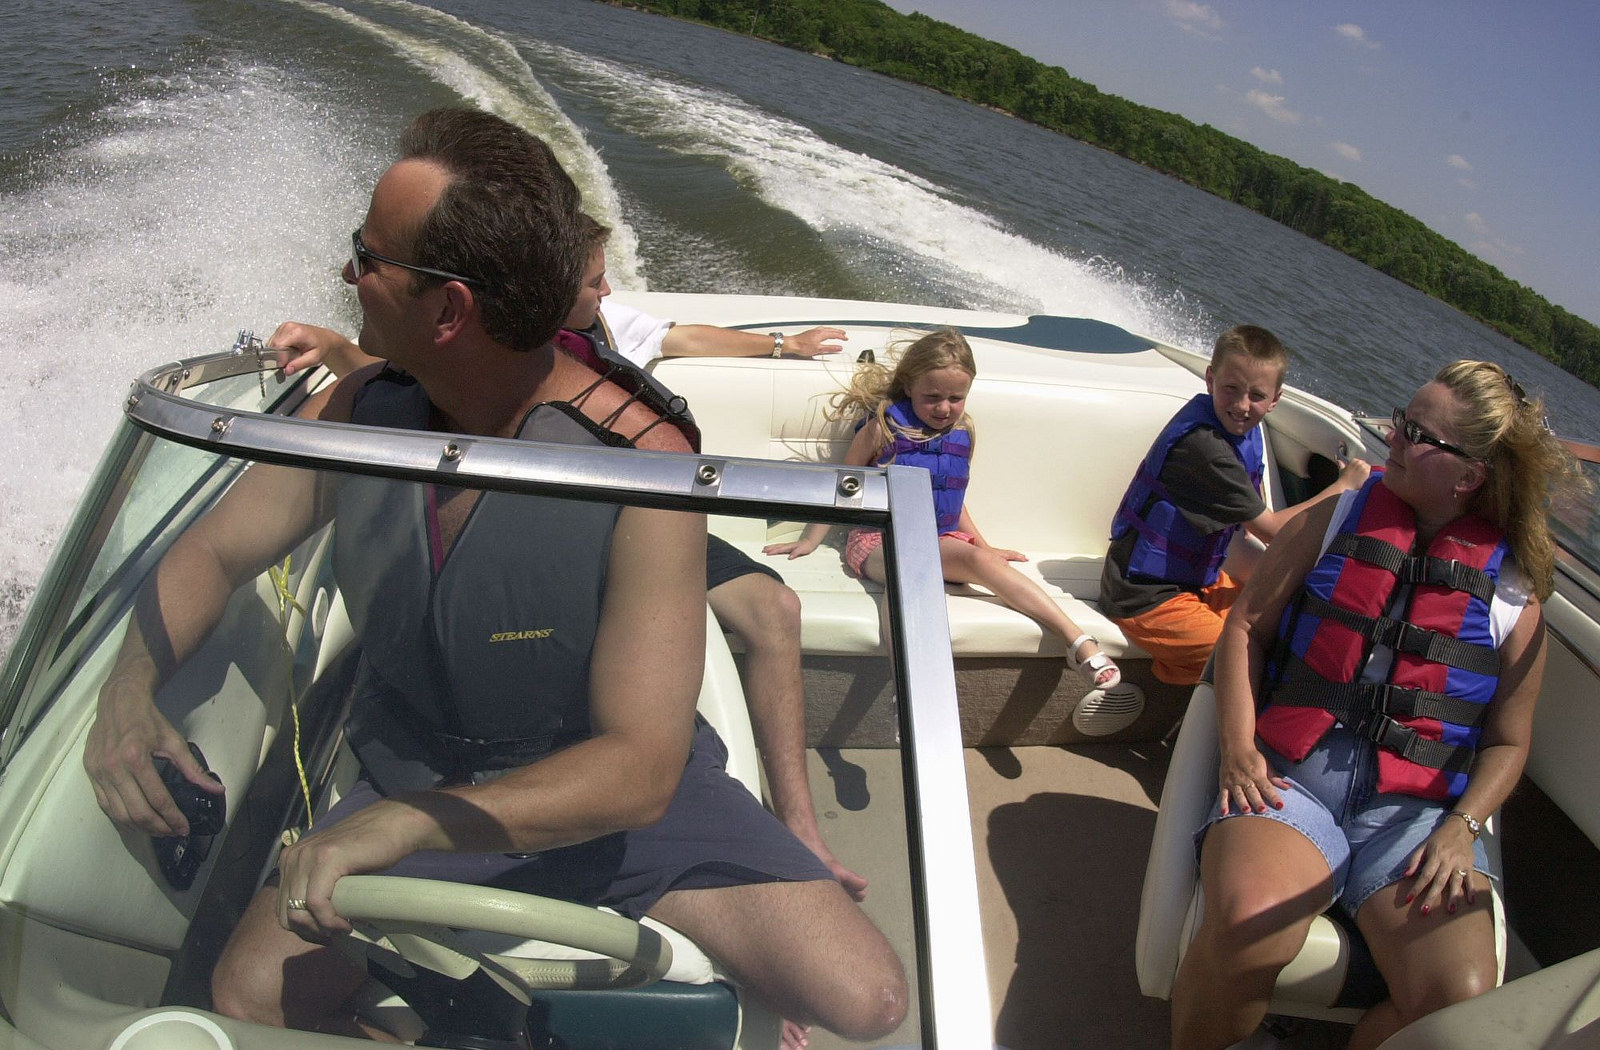 Download the Top Apps for Safer Boating and stay well this summer